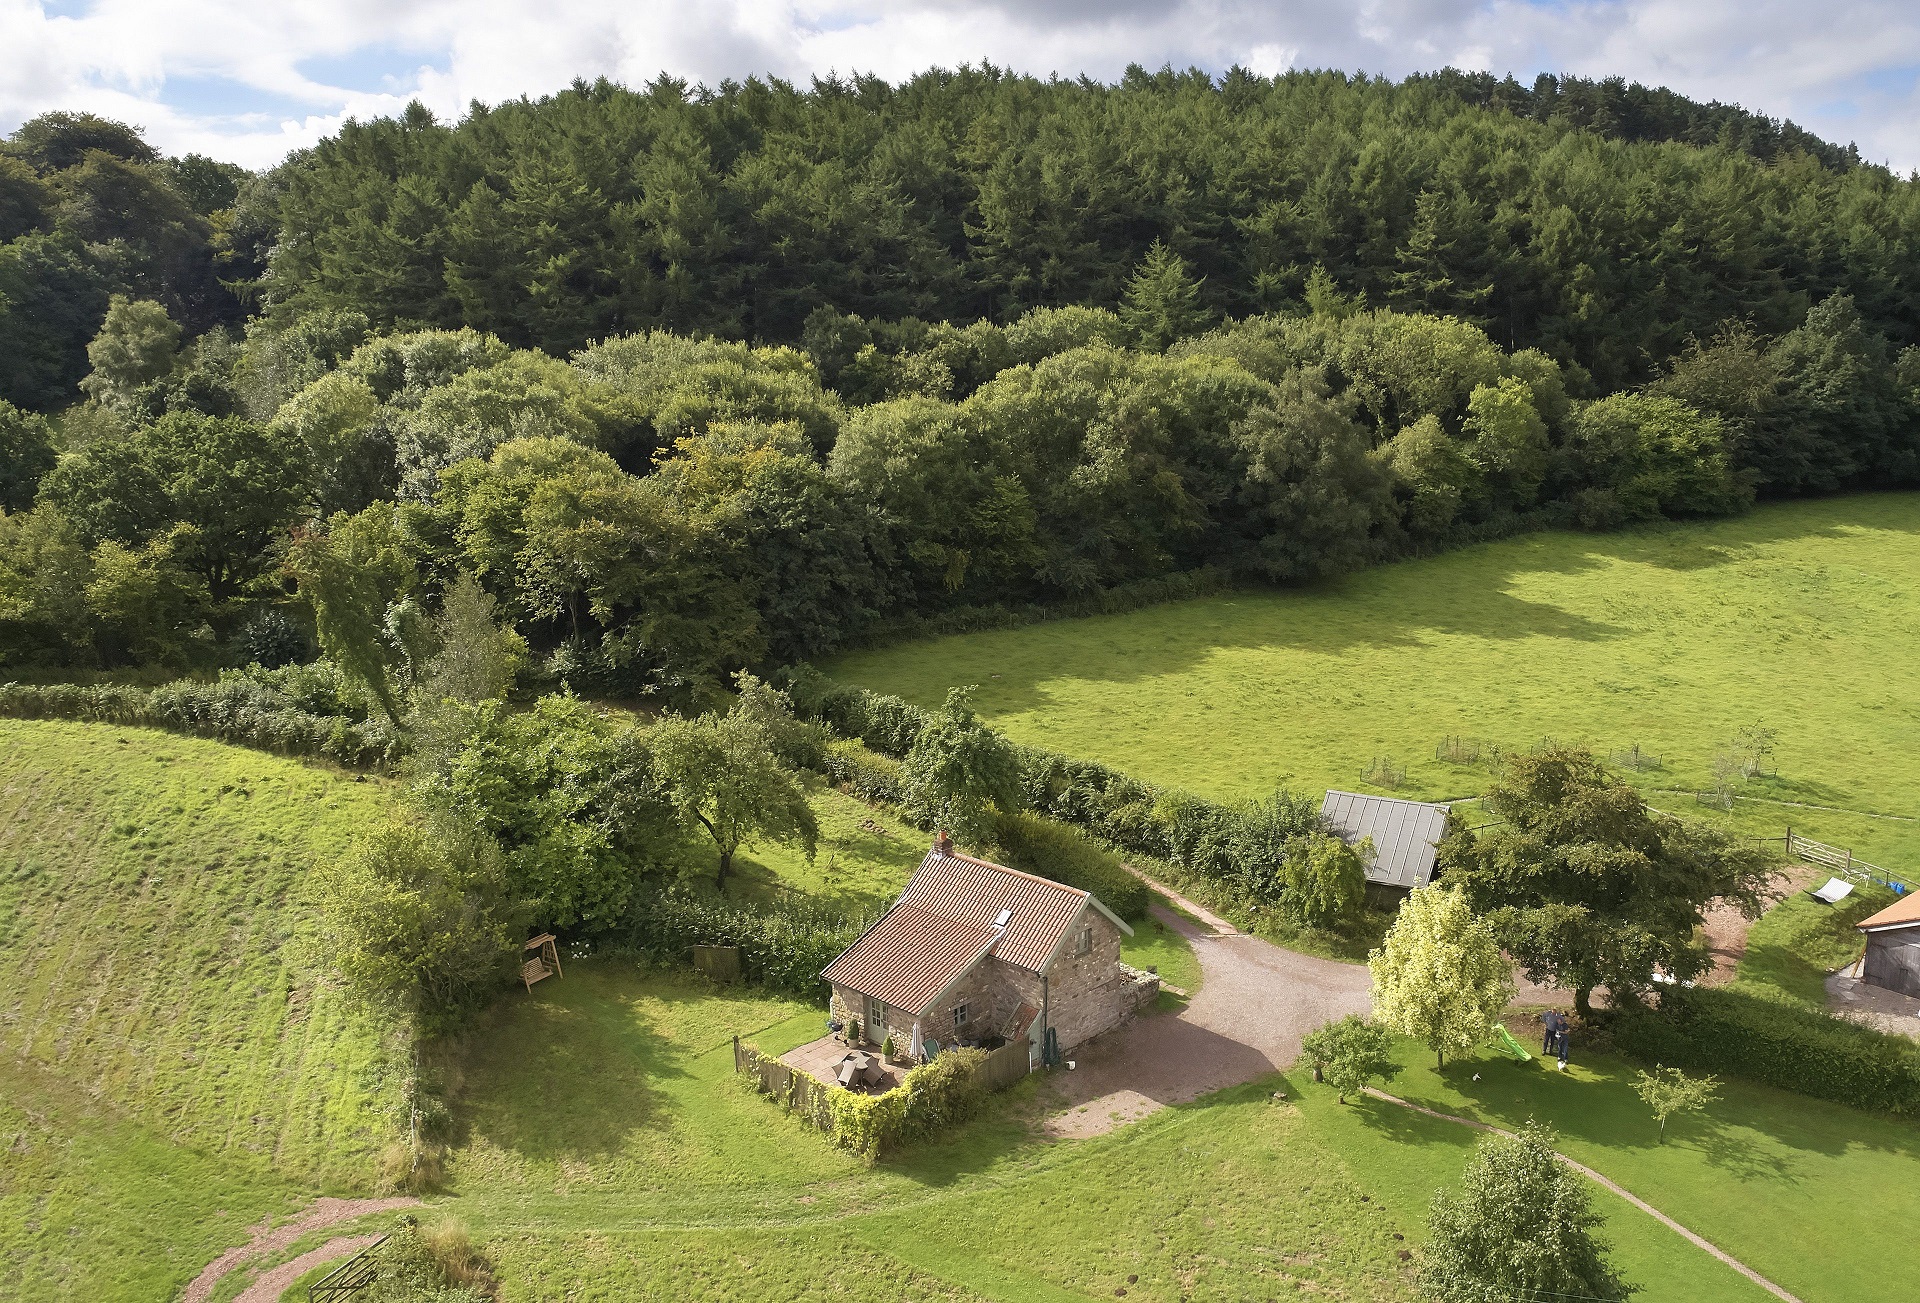 An aerial view of a stone-built Wye Valley cottage surrounded by fields and  dense woodland on a sunny day.